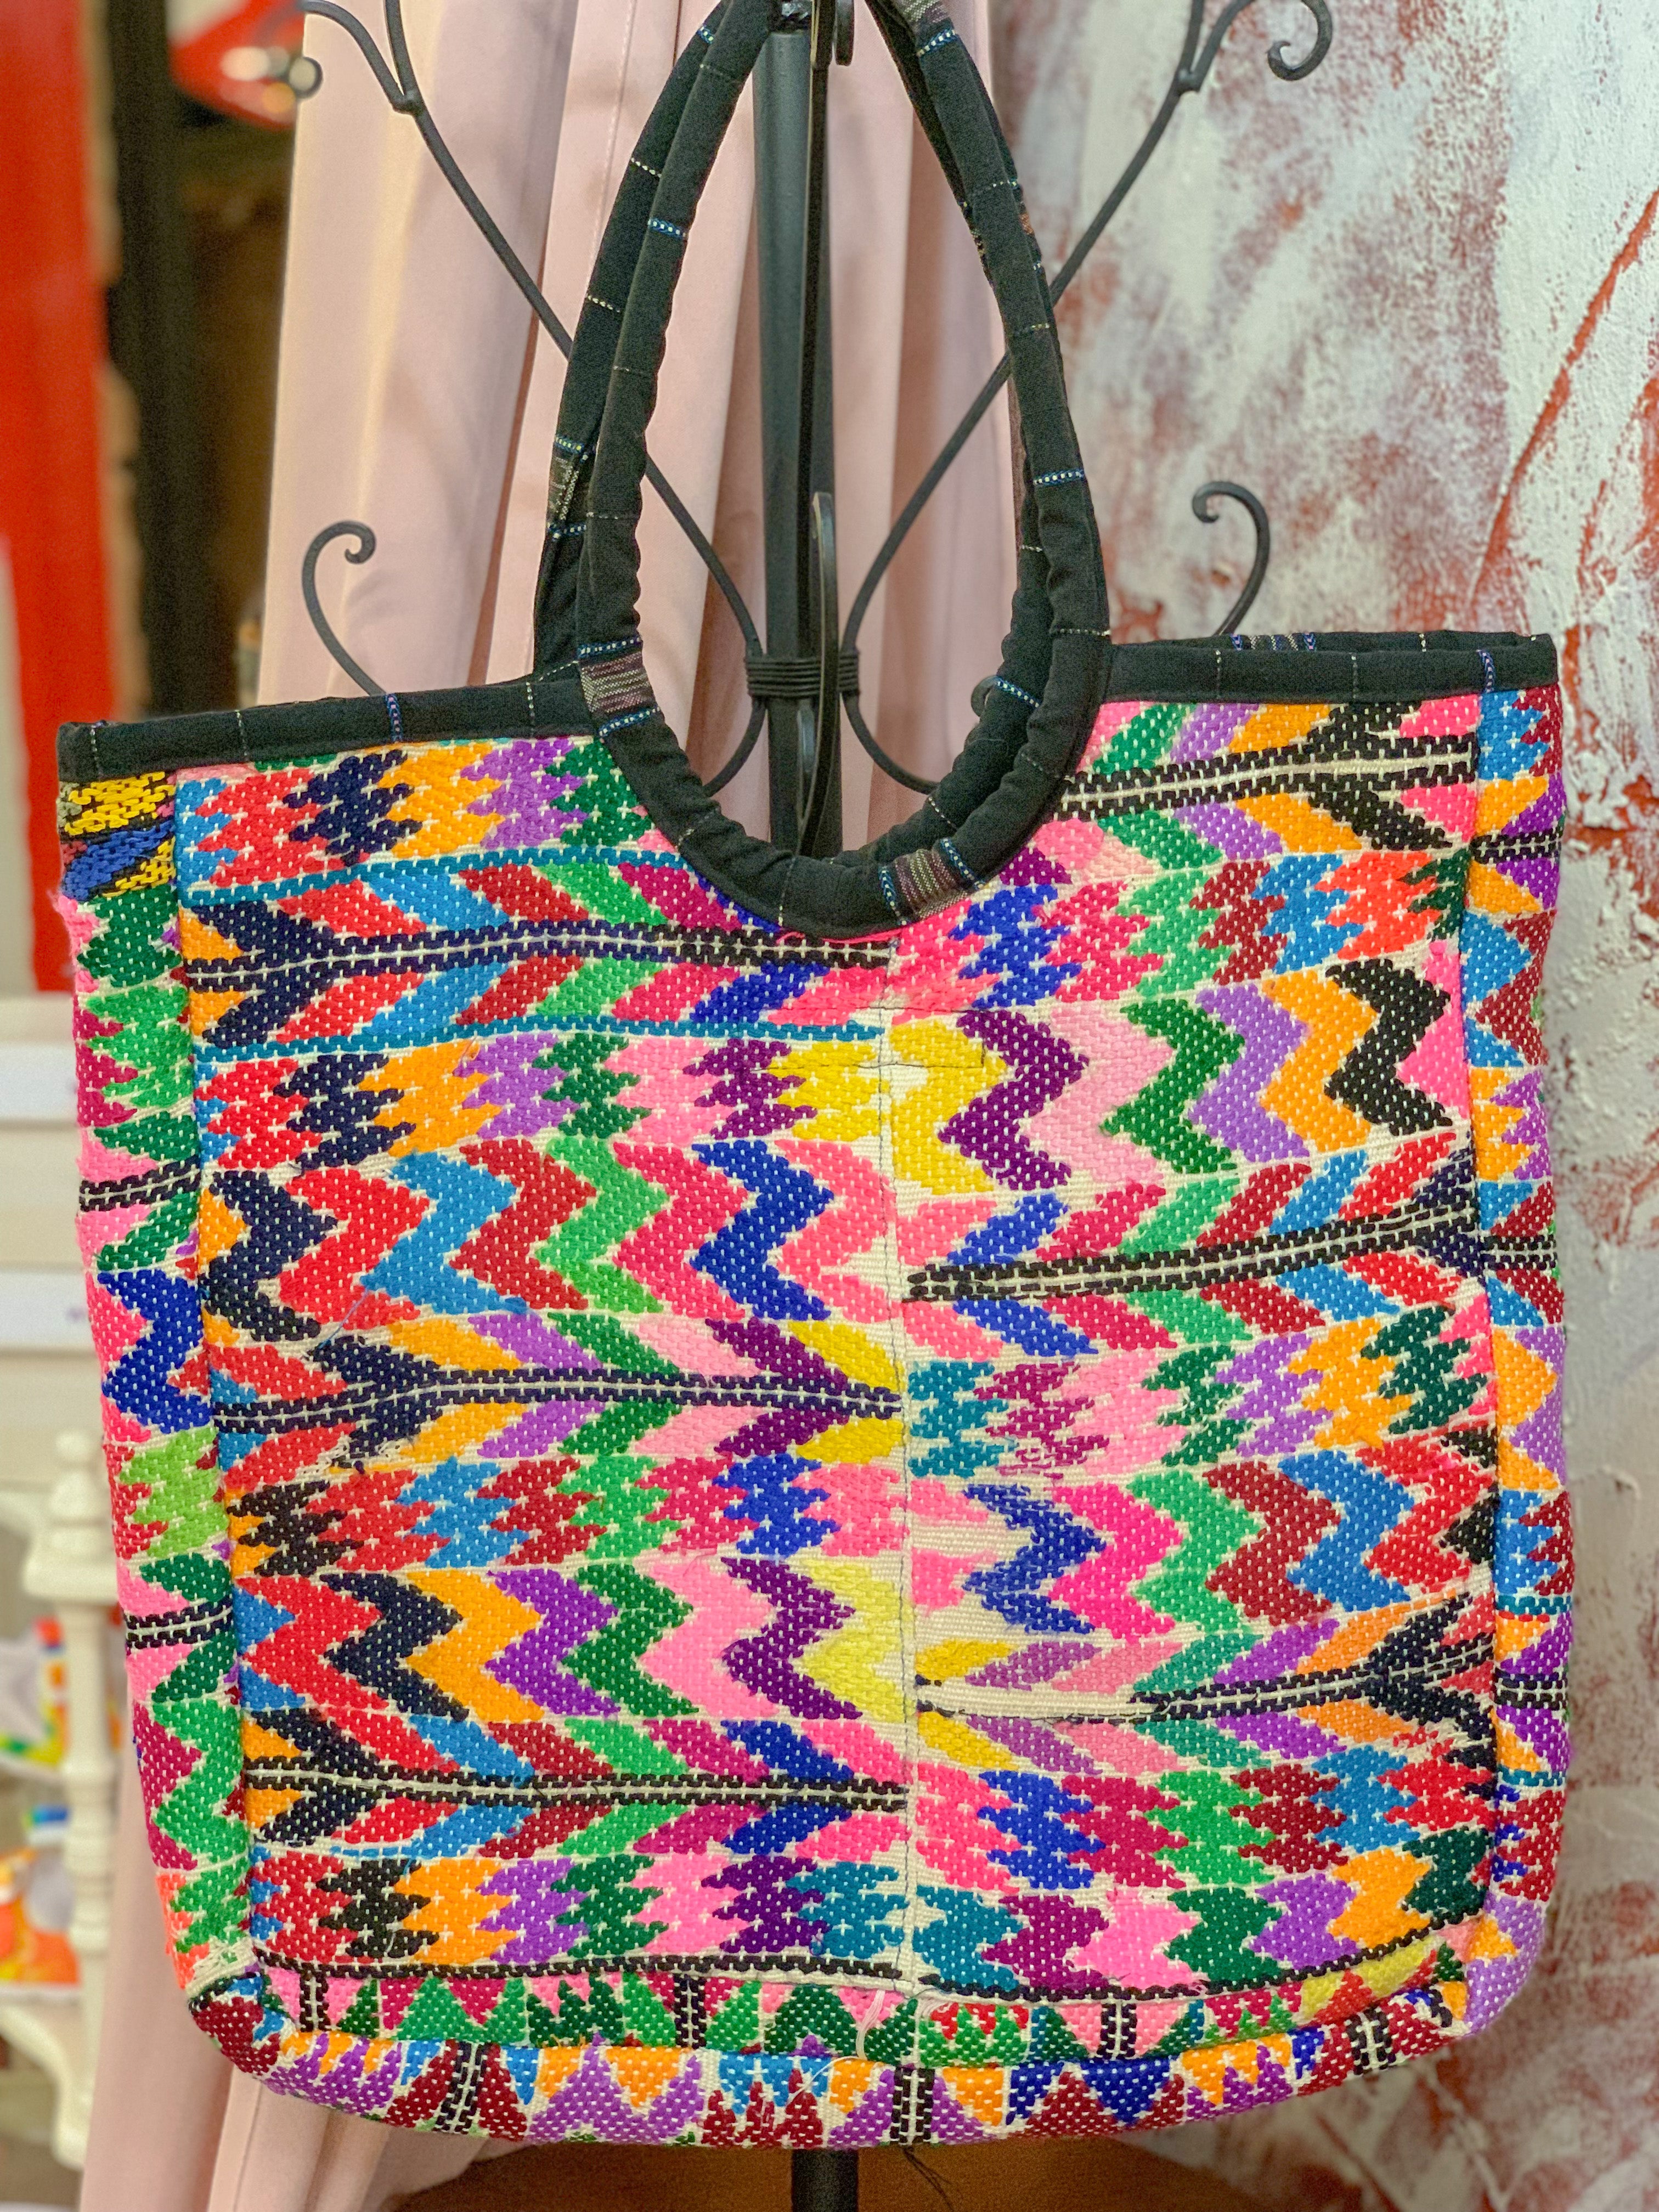 Buy Non Refundable Final Deposit for a Newly Woven Huipil Bag, Full Grain  Leather Bag for Madam Becca Online in India - Etsy